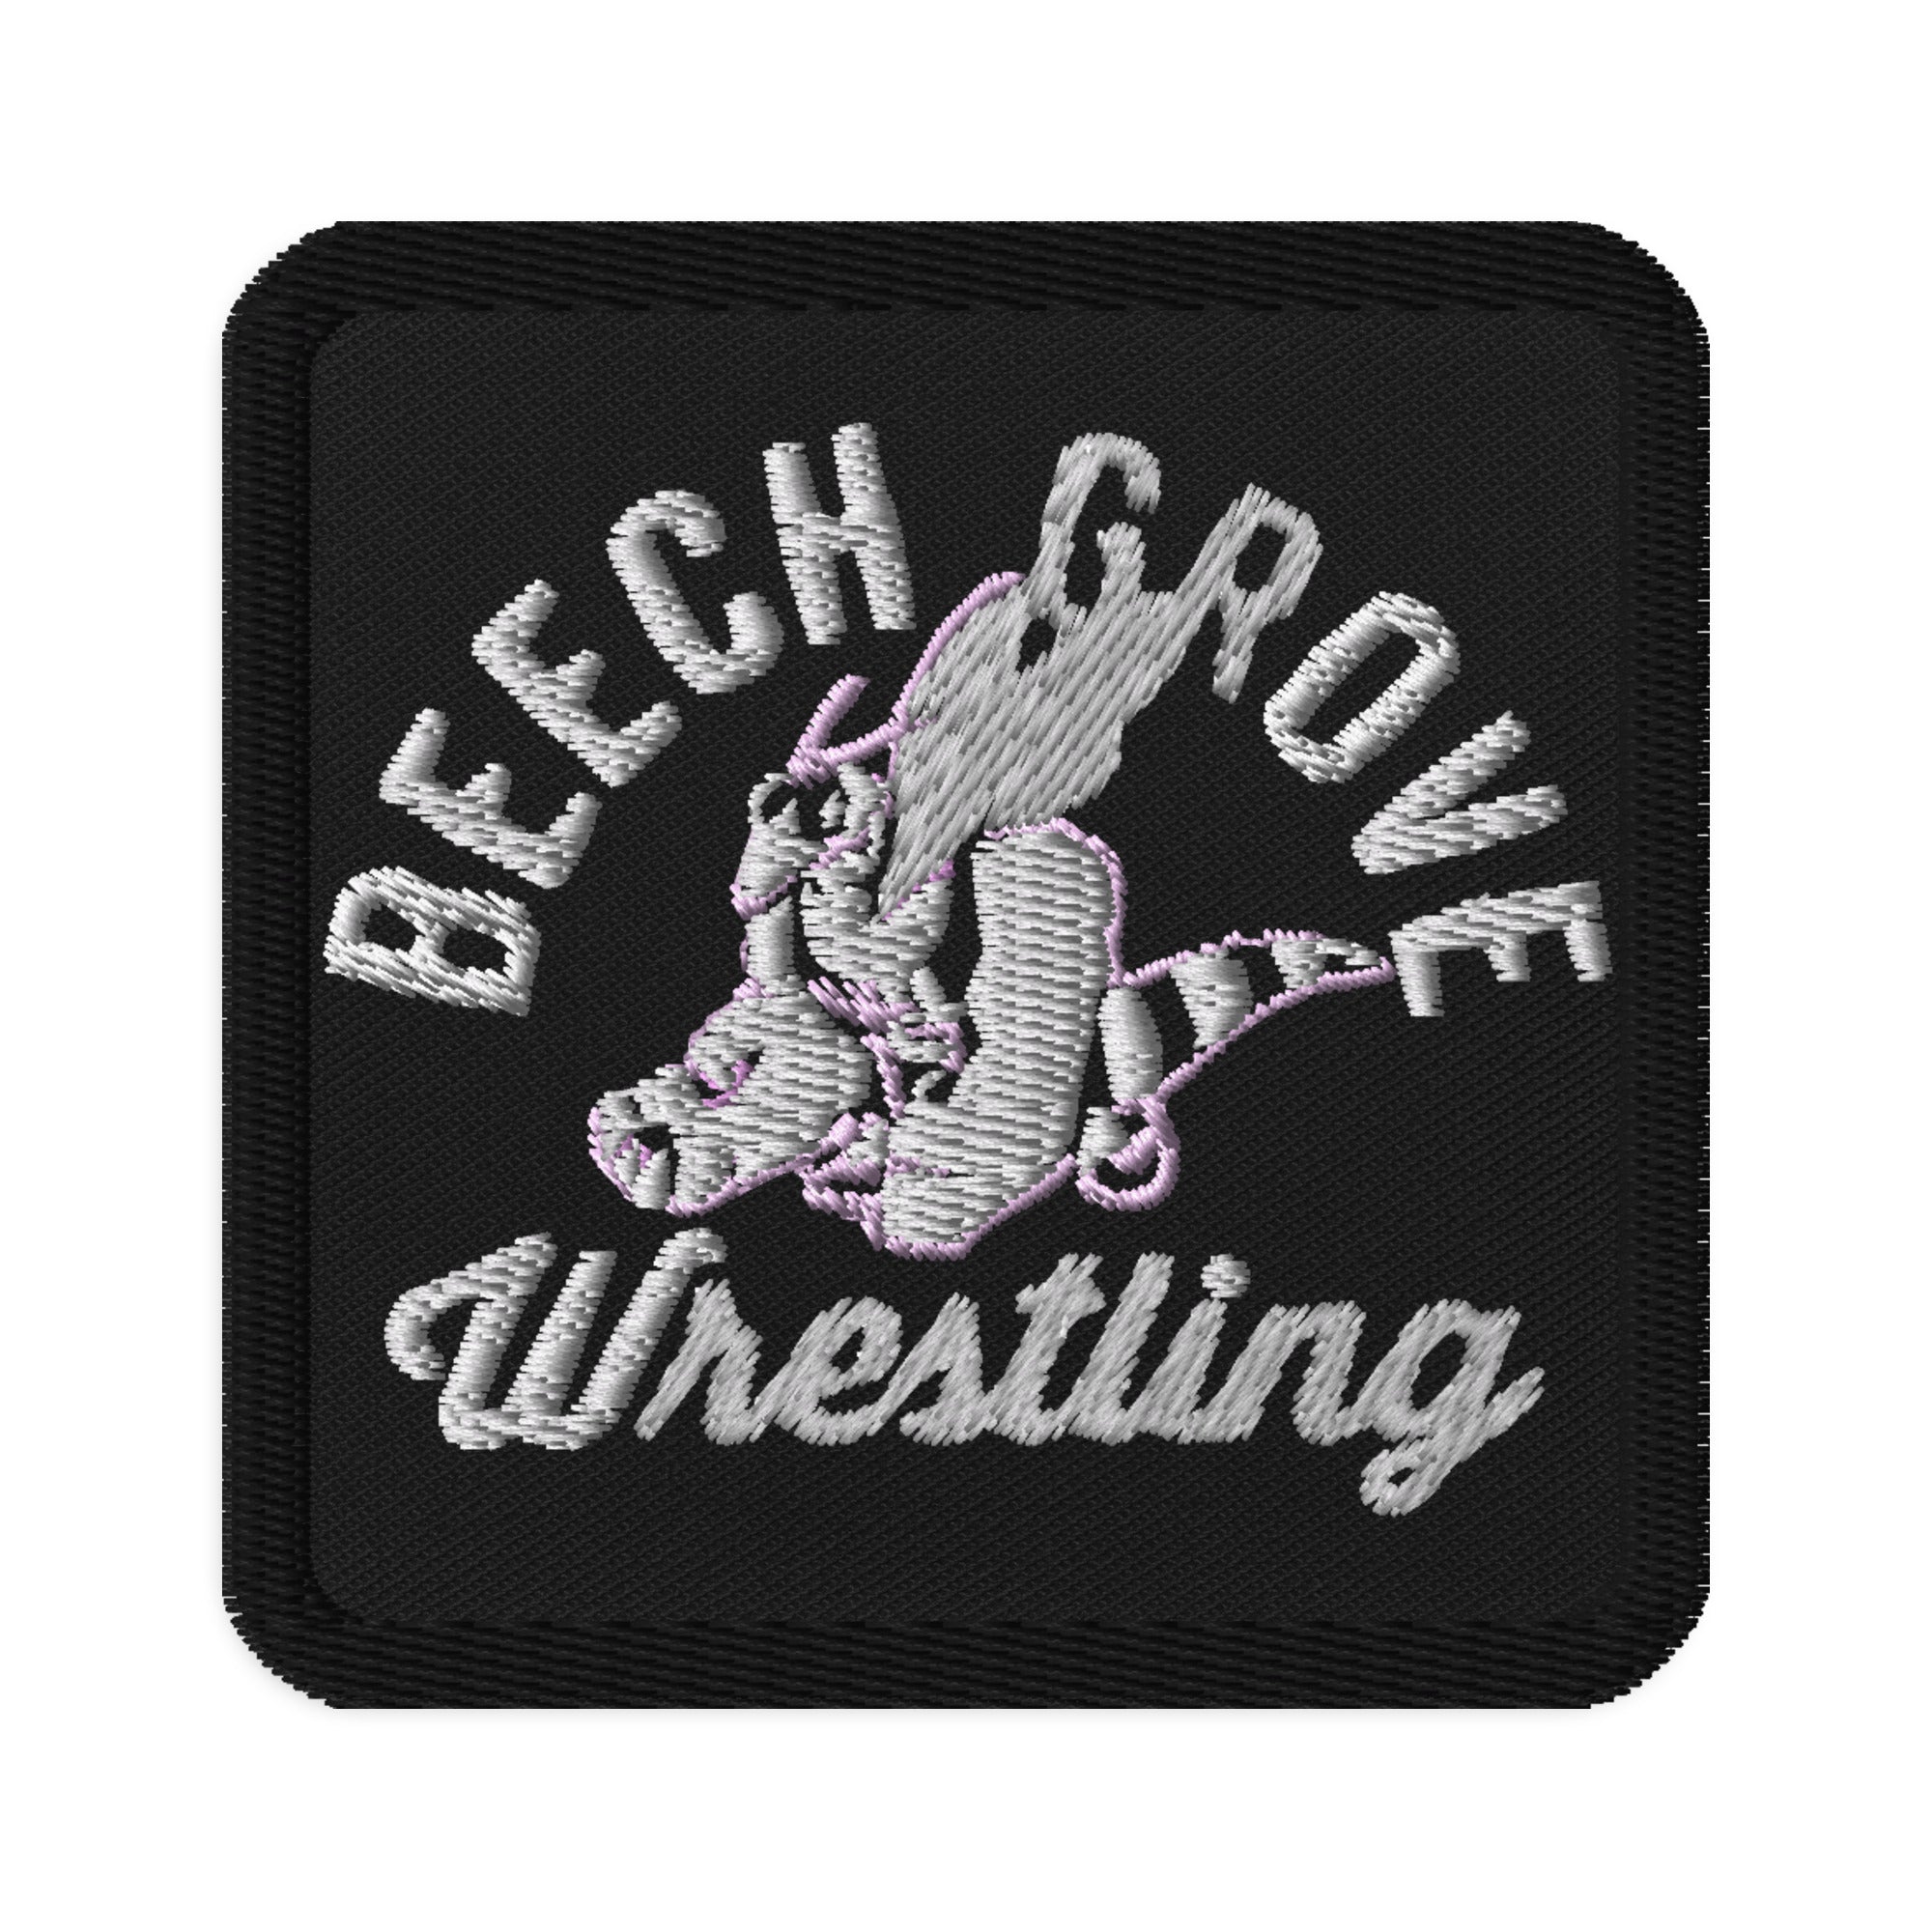 Beech Grove Wrestling Embroidered Patches